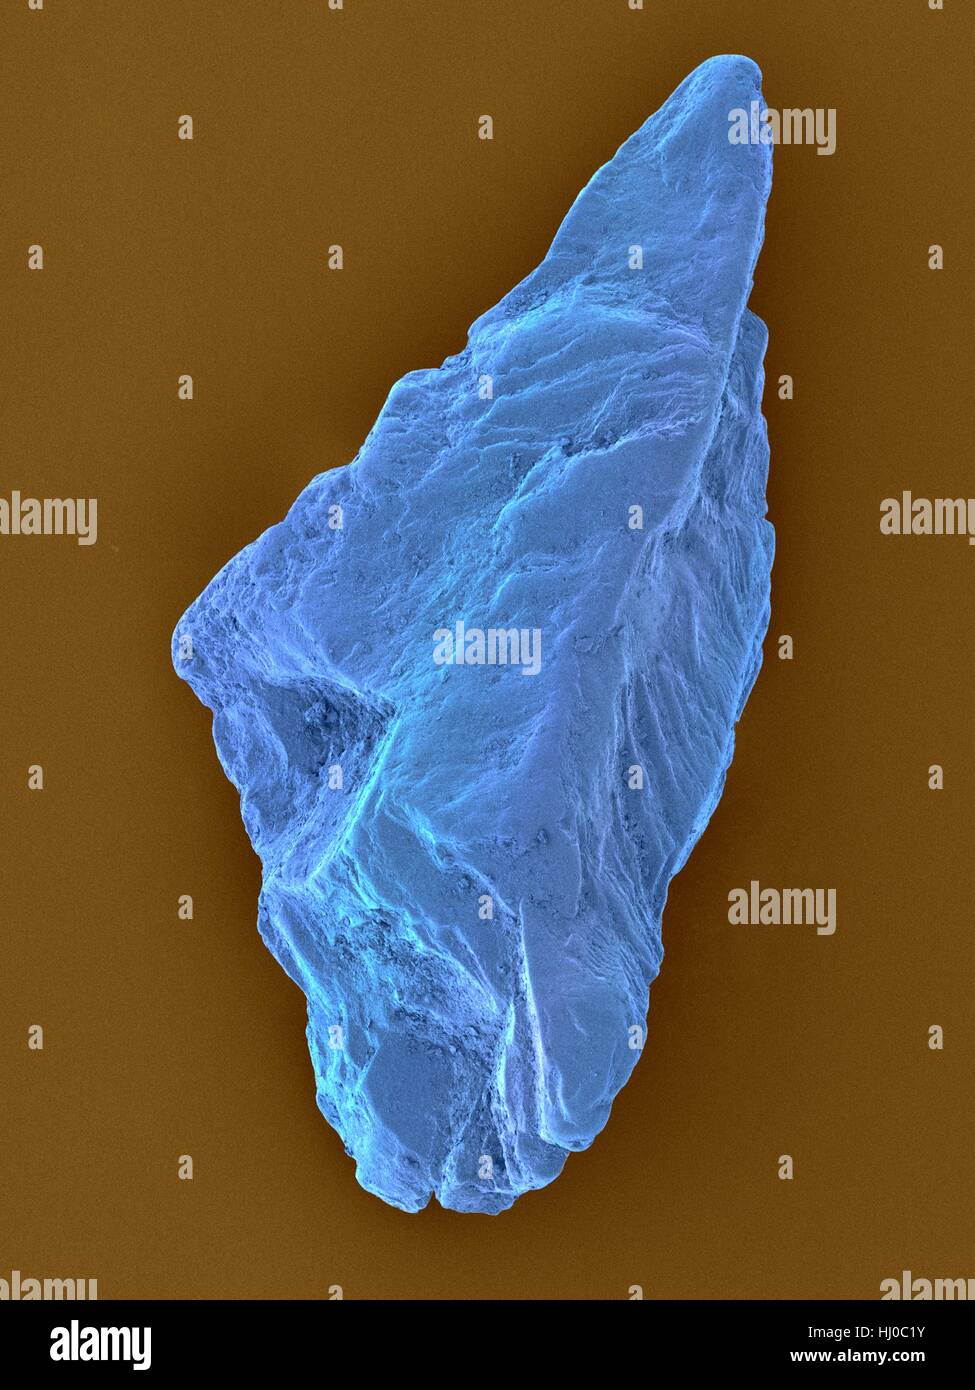 Coloured scanning electron micrograph (SEM) of an uncut sapphire. Sapphire is a typically blue gemstone variety of the mineral corundum (aluminium oxide). Sapphire is very dense and very hard. Non-gem quality sapphire is often used as an industrial abrasive, or as scratch-resistant glass. Magnification: x130 when shortest axis printed at 25 millimetres. Stock Photo